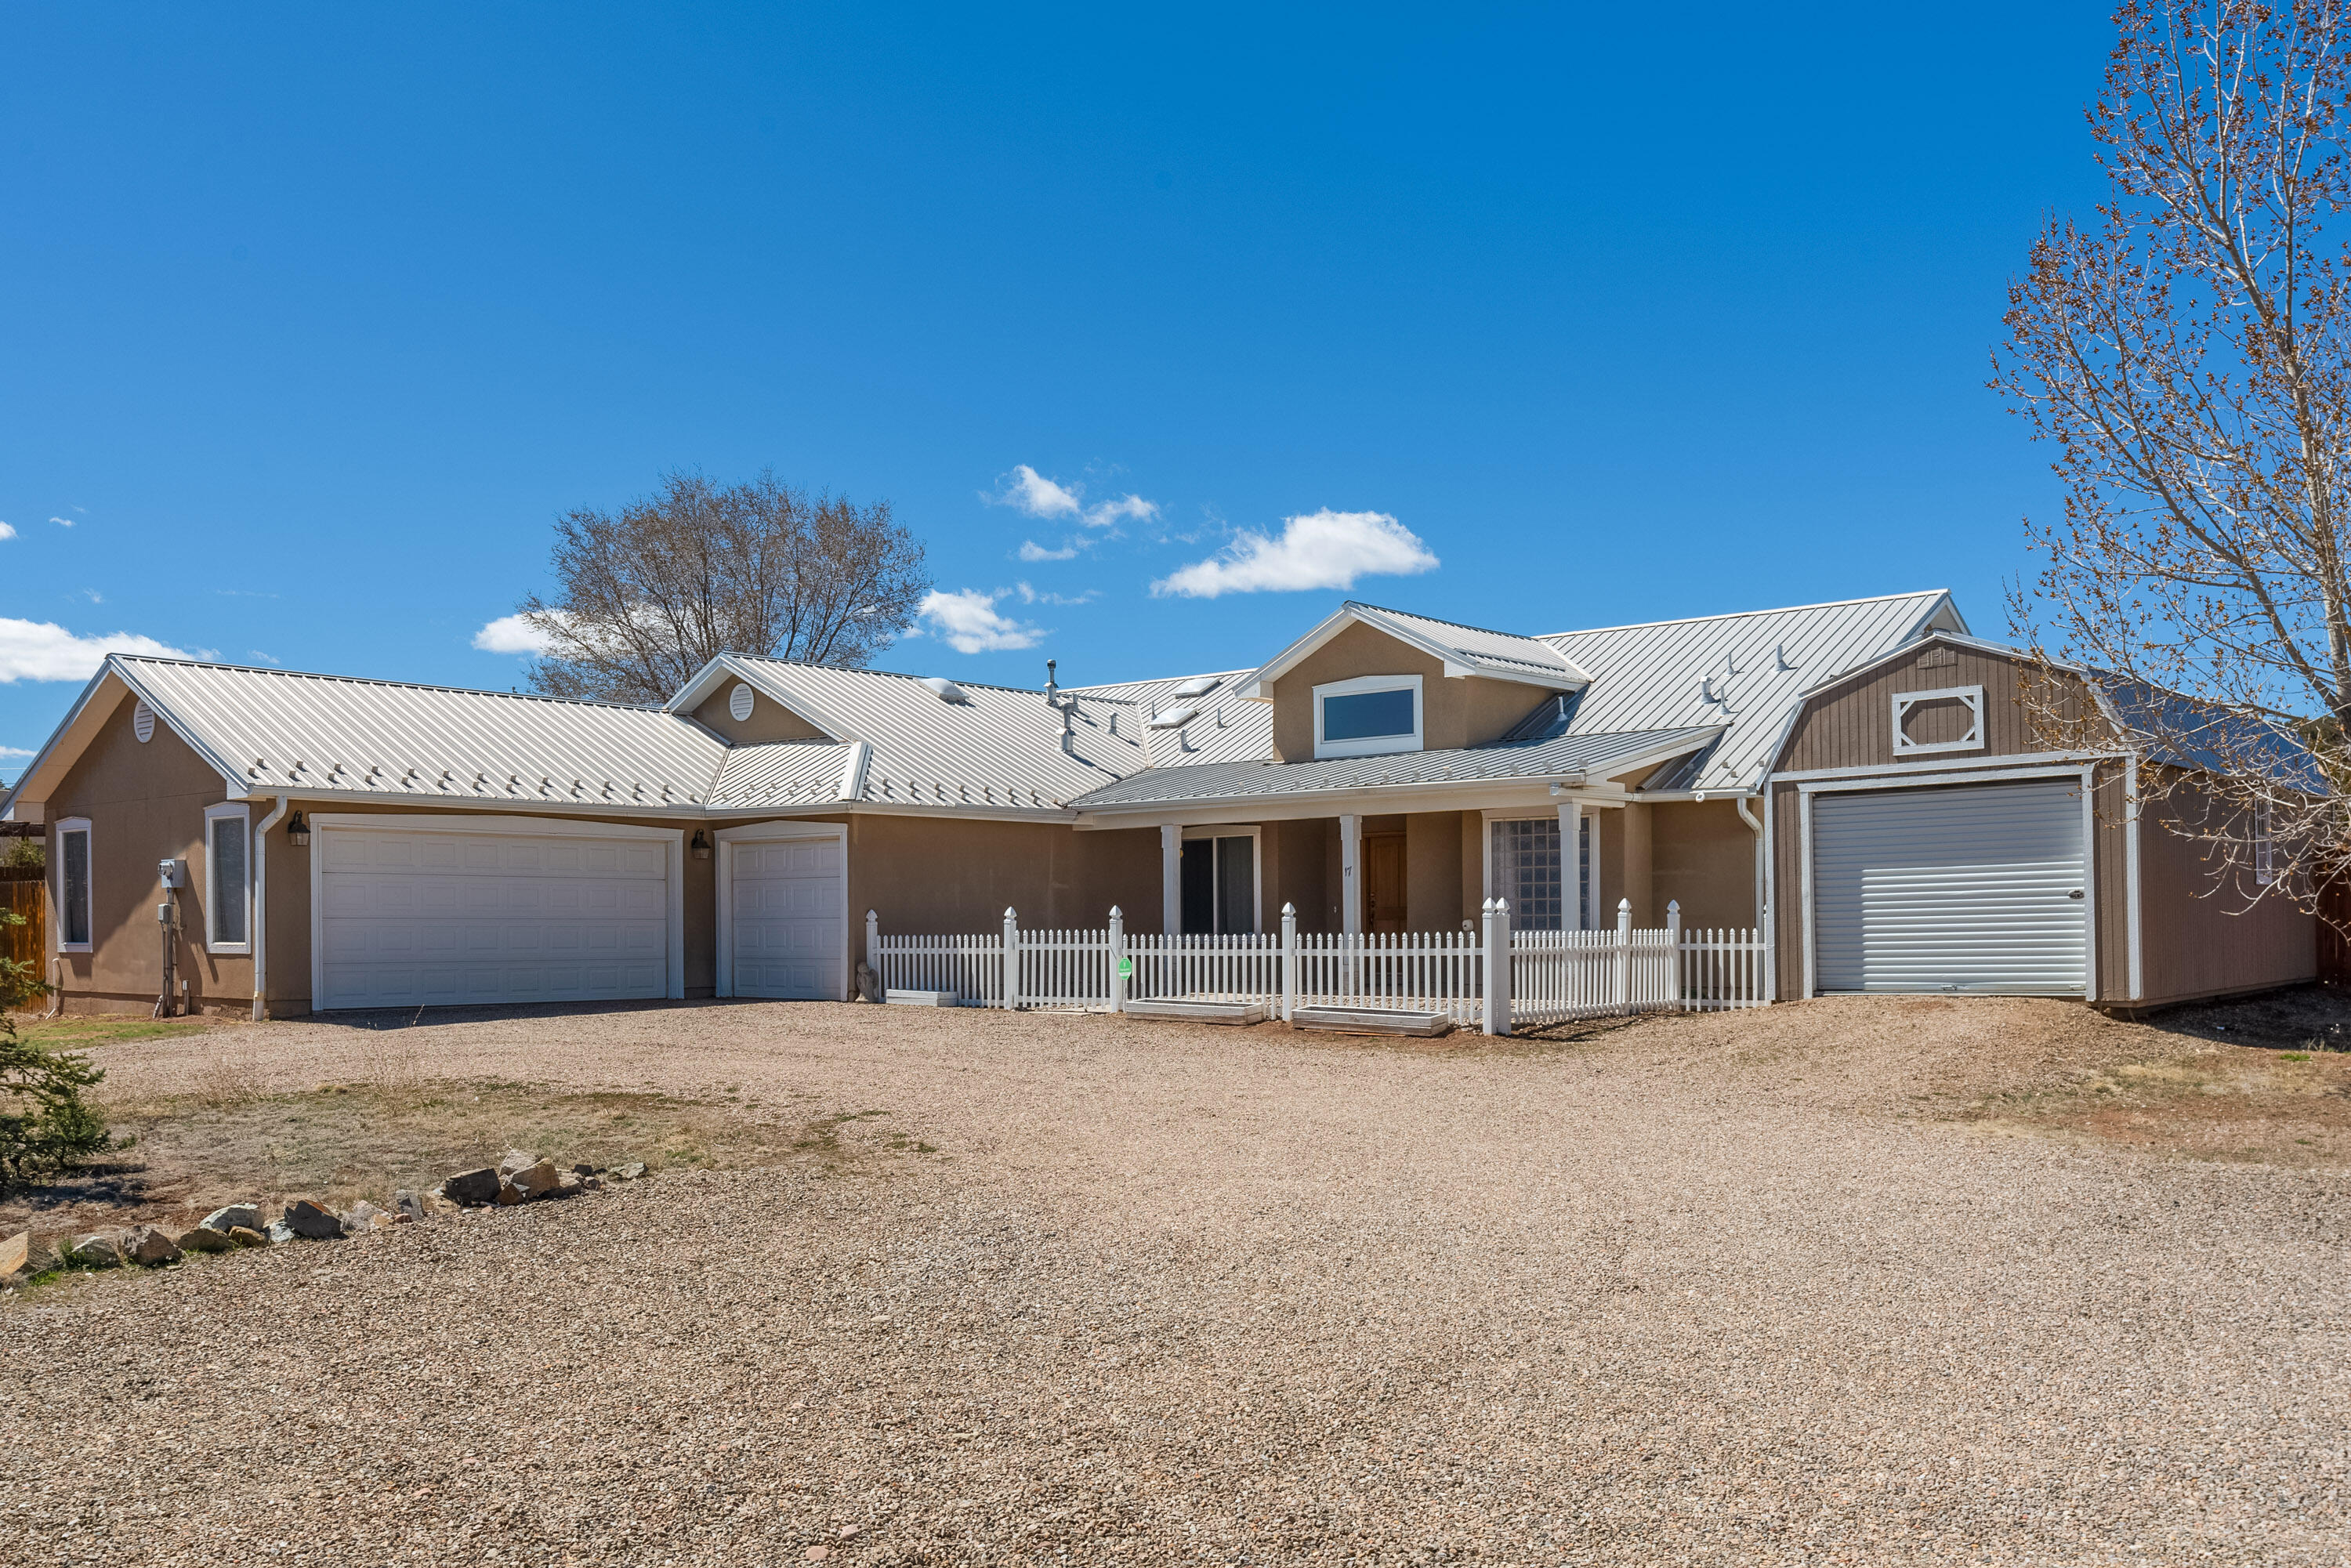 What a great escape from Albuquerque! A northern New Mexico style on treed 1 acre lot includes insulated 3 car garage w/separate 15X15 workshop, RV pad w/50-amp service & 12X32 shed w/roll up door. Wood beams, corbels, vigas, & nichos accent the open floorplan. In the heart of the home, a sophisticated kitchen w/ island, granite counters, bar seating & opens to gracious breakfast nook & entertaining area. Spacious, bright living area w/vaulted ceiling, pellet stove & formal dining.Primary suite has door to the back patio, walkin closet, & luxurious bath w/soaking tub, separate shower,2 vanities. Covered patio,fenced courtyard in front with no maintenance rock. Lg fenced backyard w/native grass, plumbed for sprinkler. You'll want to make this your home!Appliances convey as is/no warranties